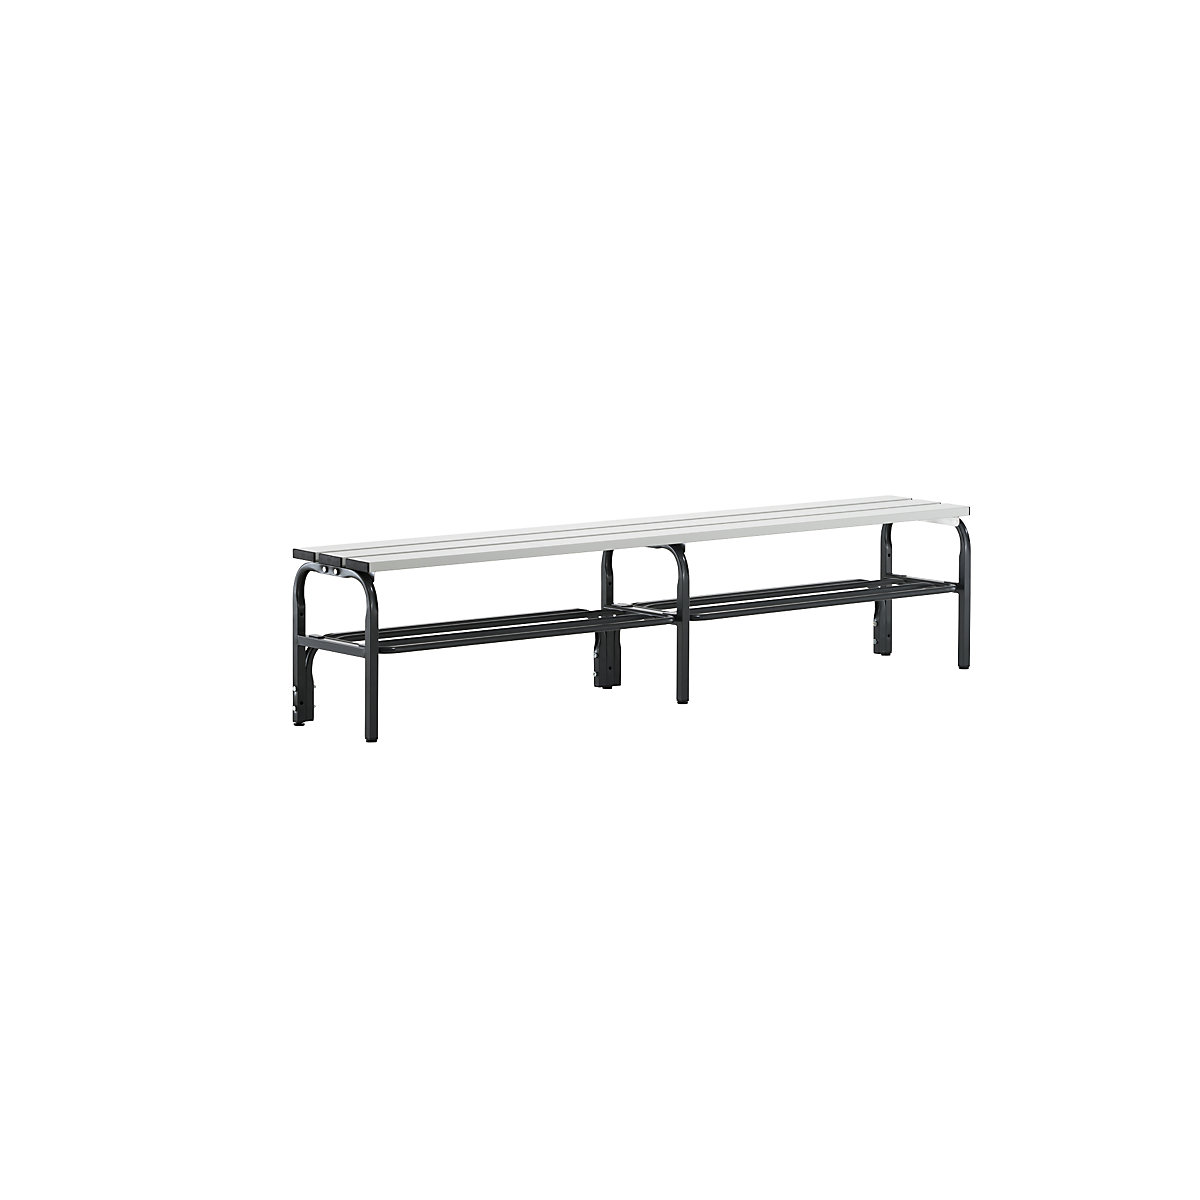 Sypro – Changing room bench with aluminium slats, HxD 450 x 350 mm, length 1500 mm, charcoal, shoe rack